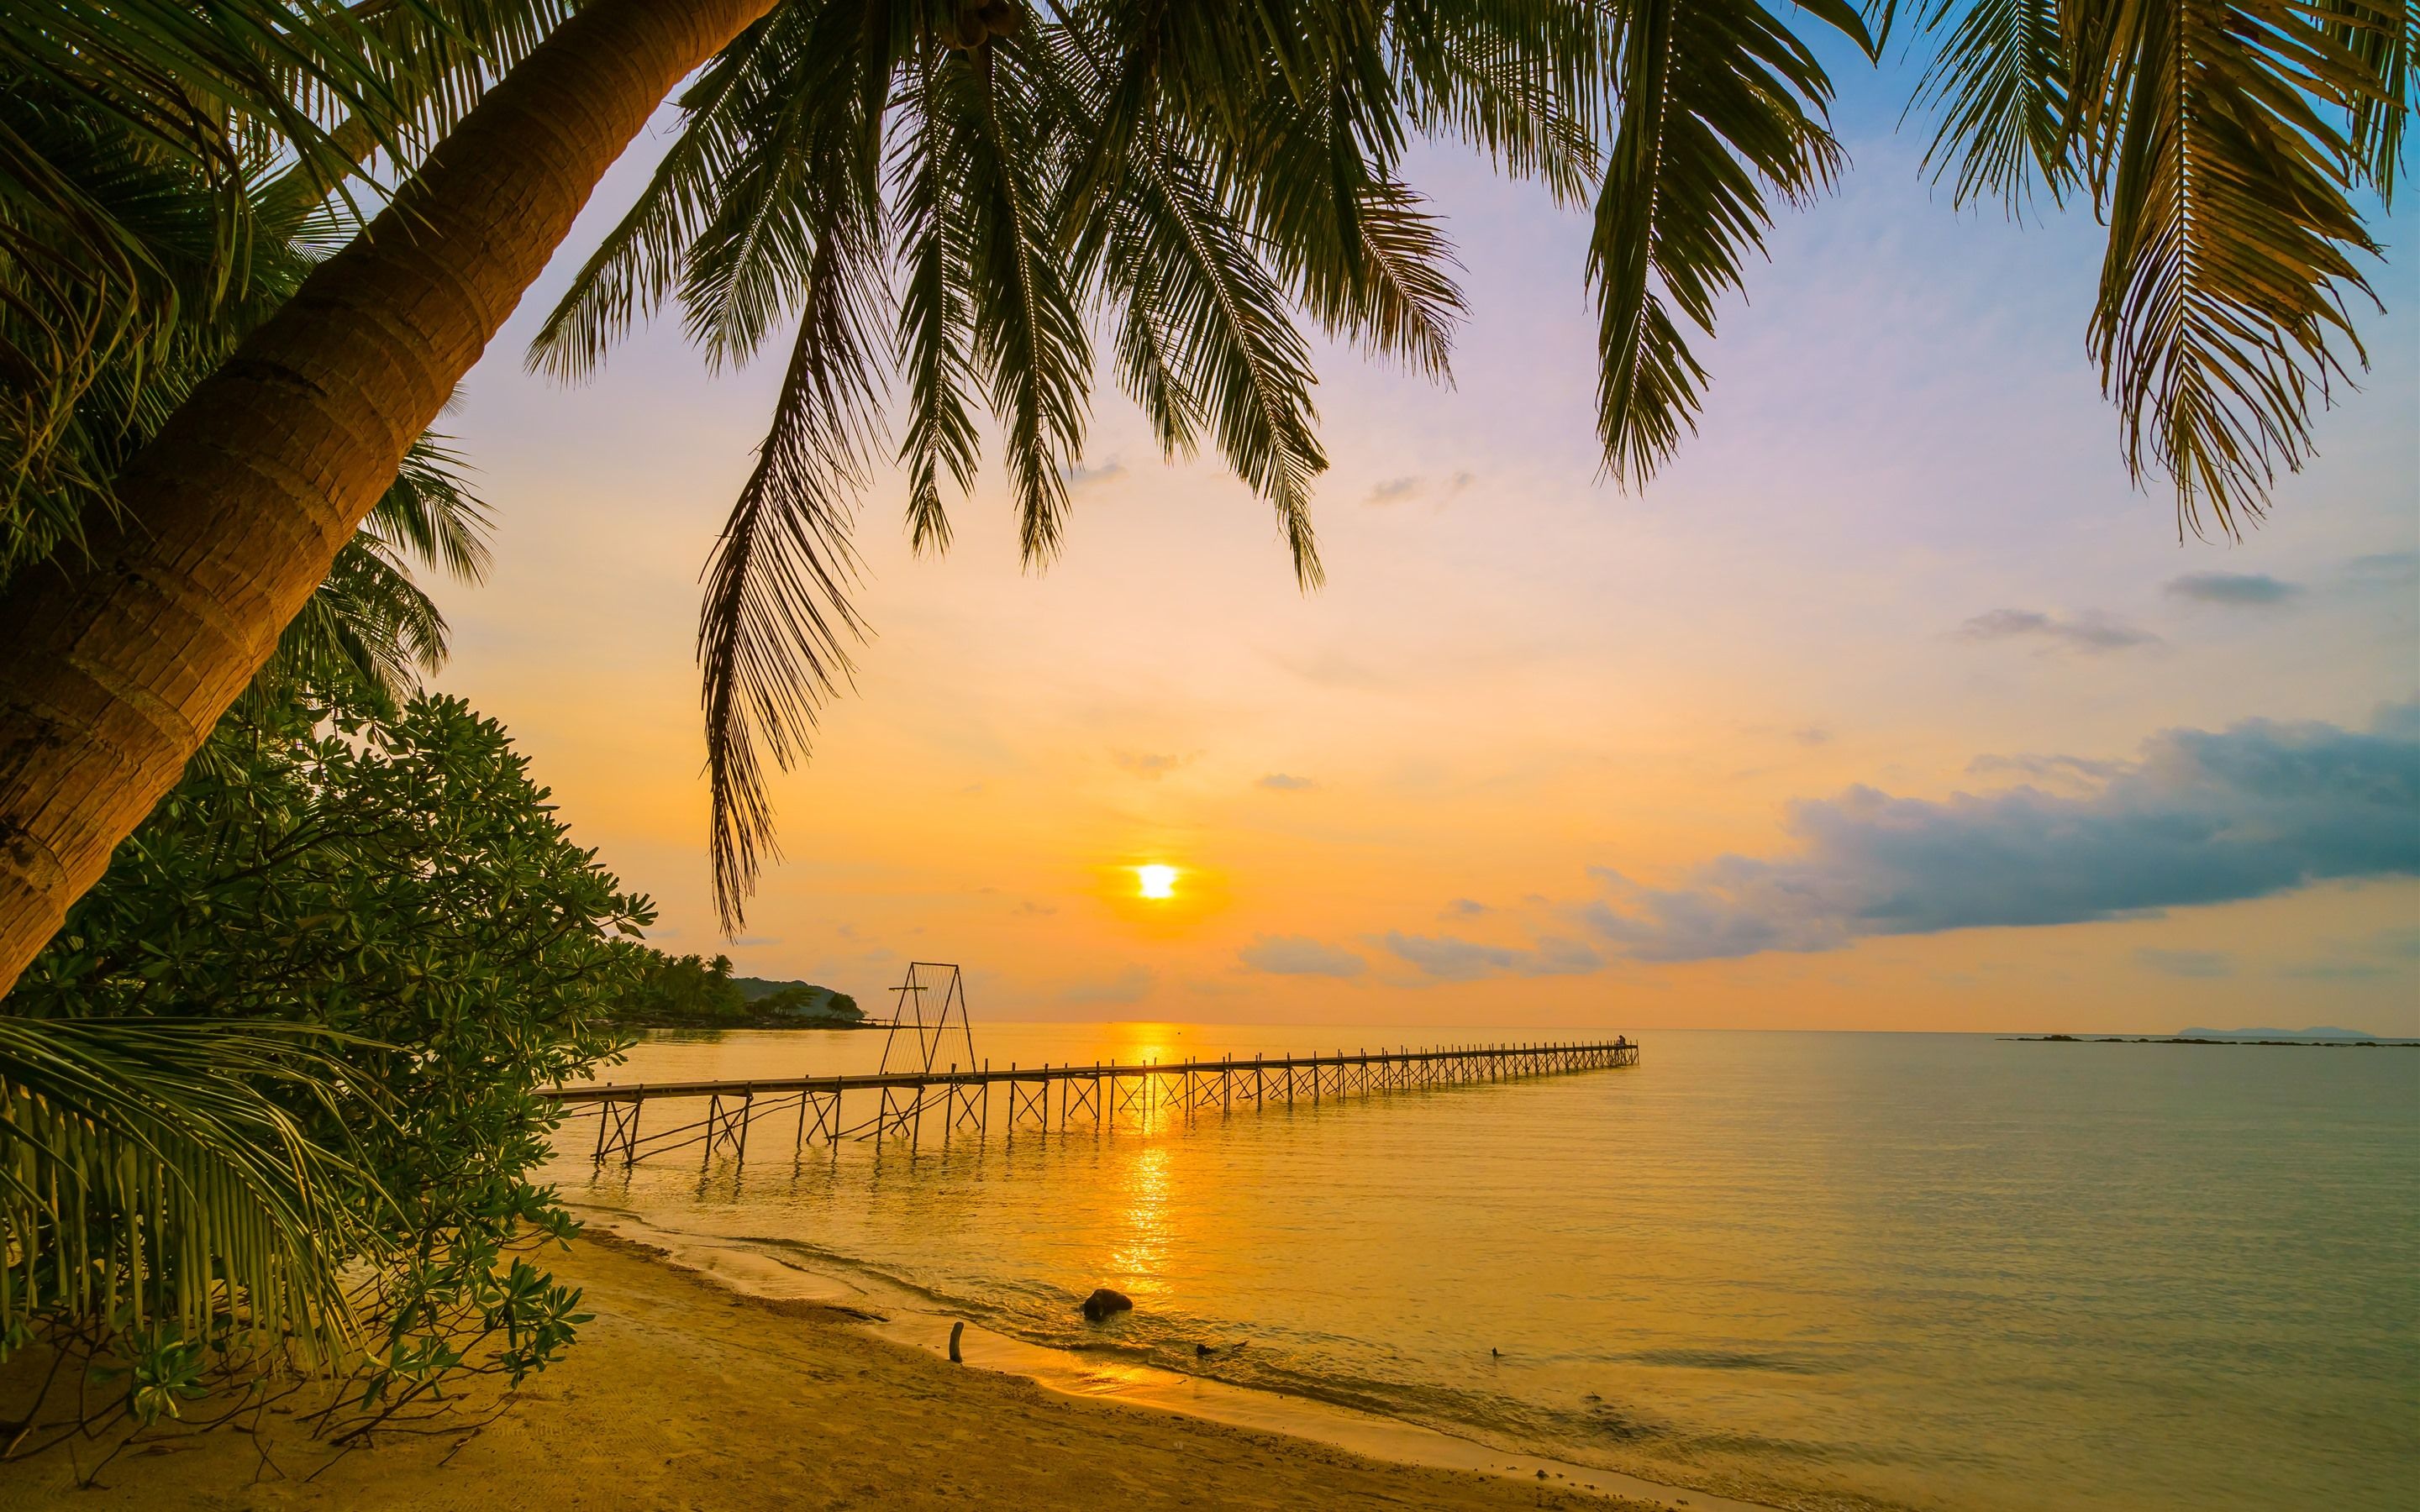 Wallpaper Tropical, summer, beach, sea, palm trees, pier, sunset 5120x2880 UHD 5K Picture, Image